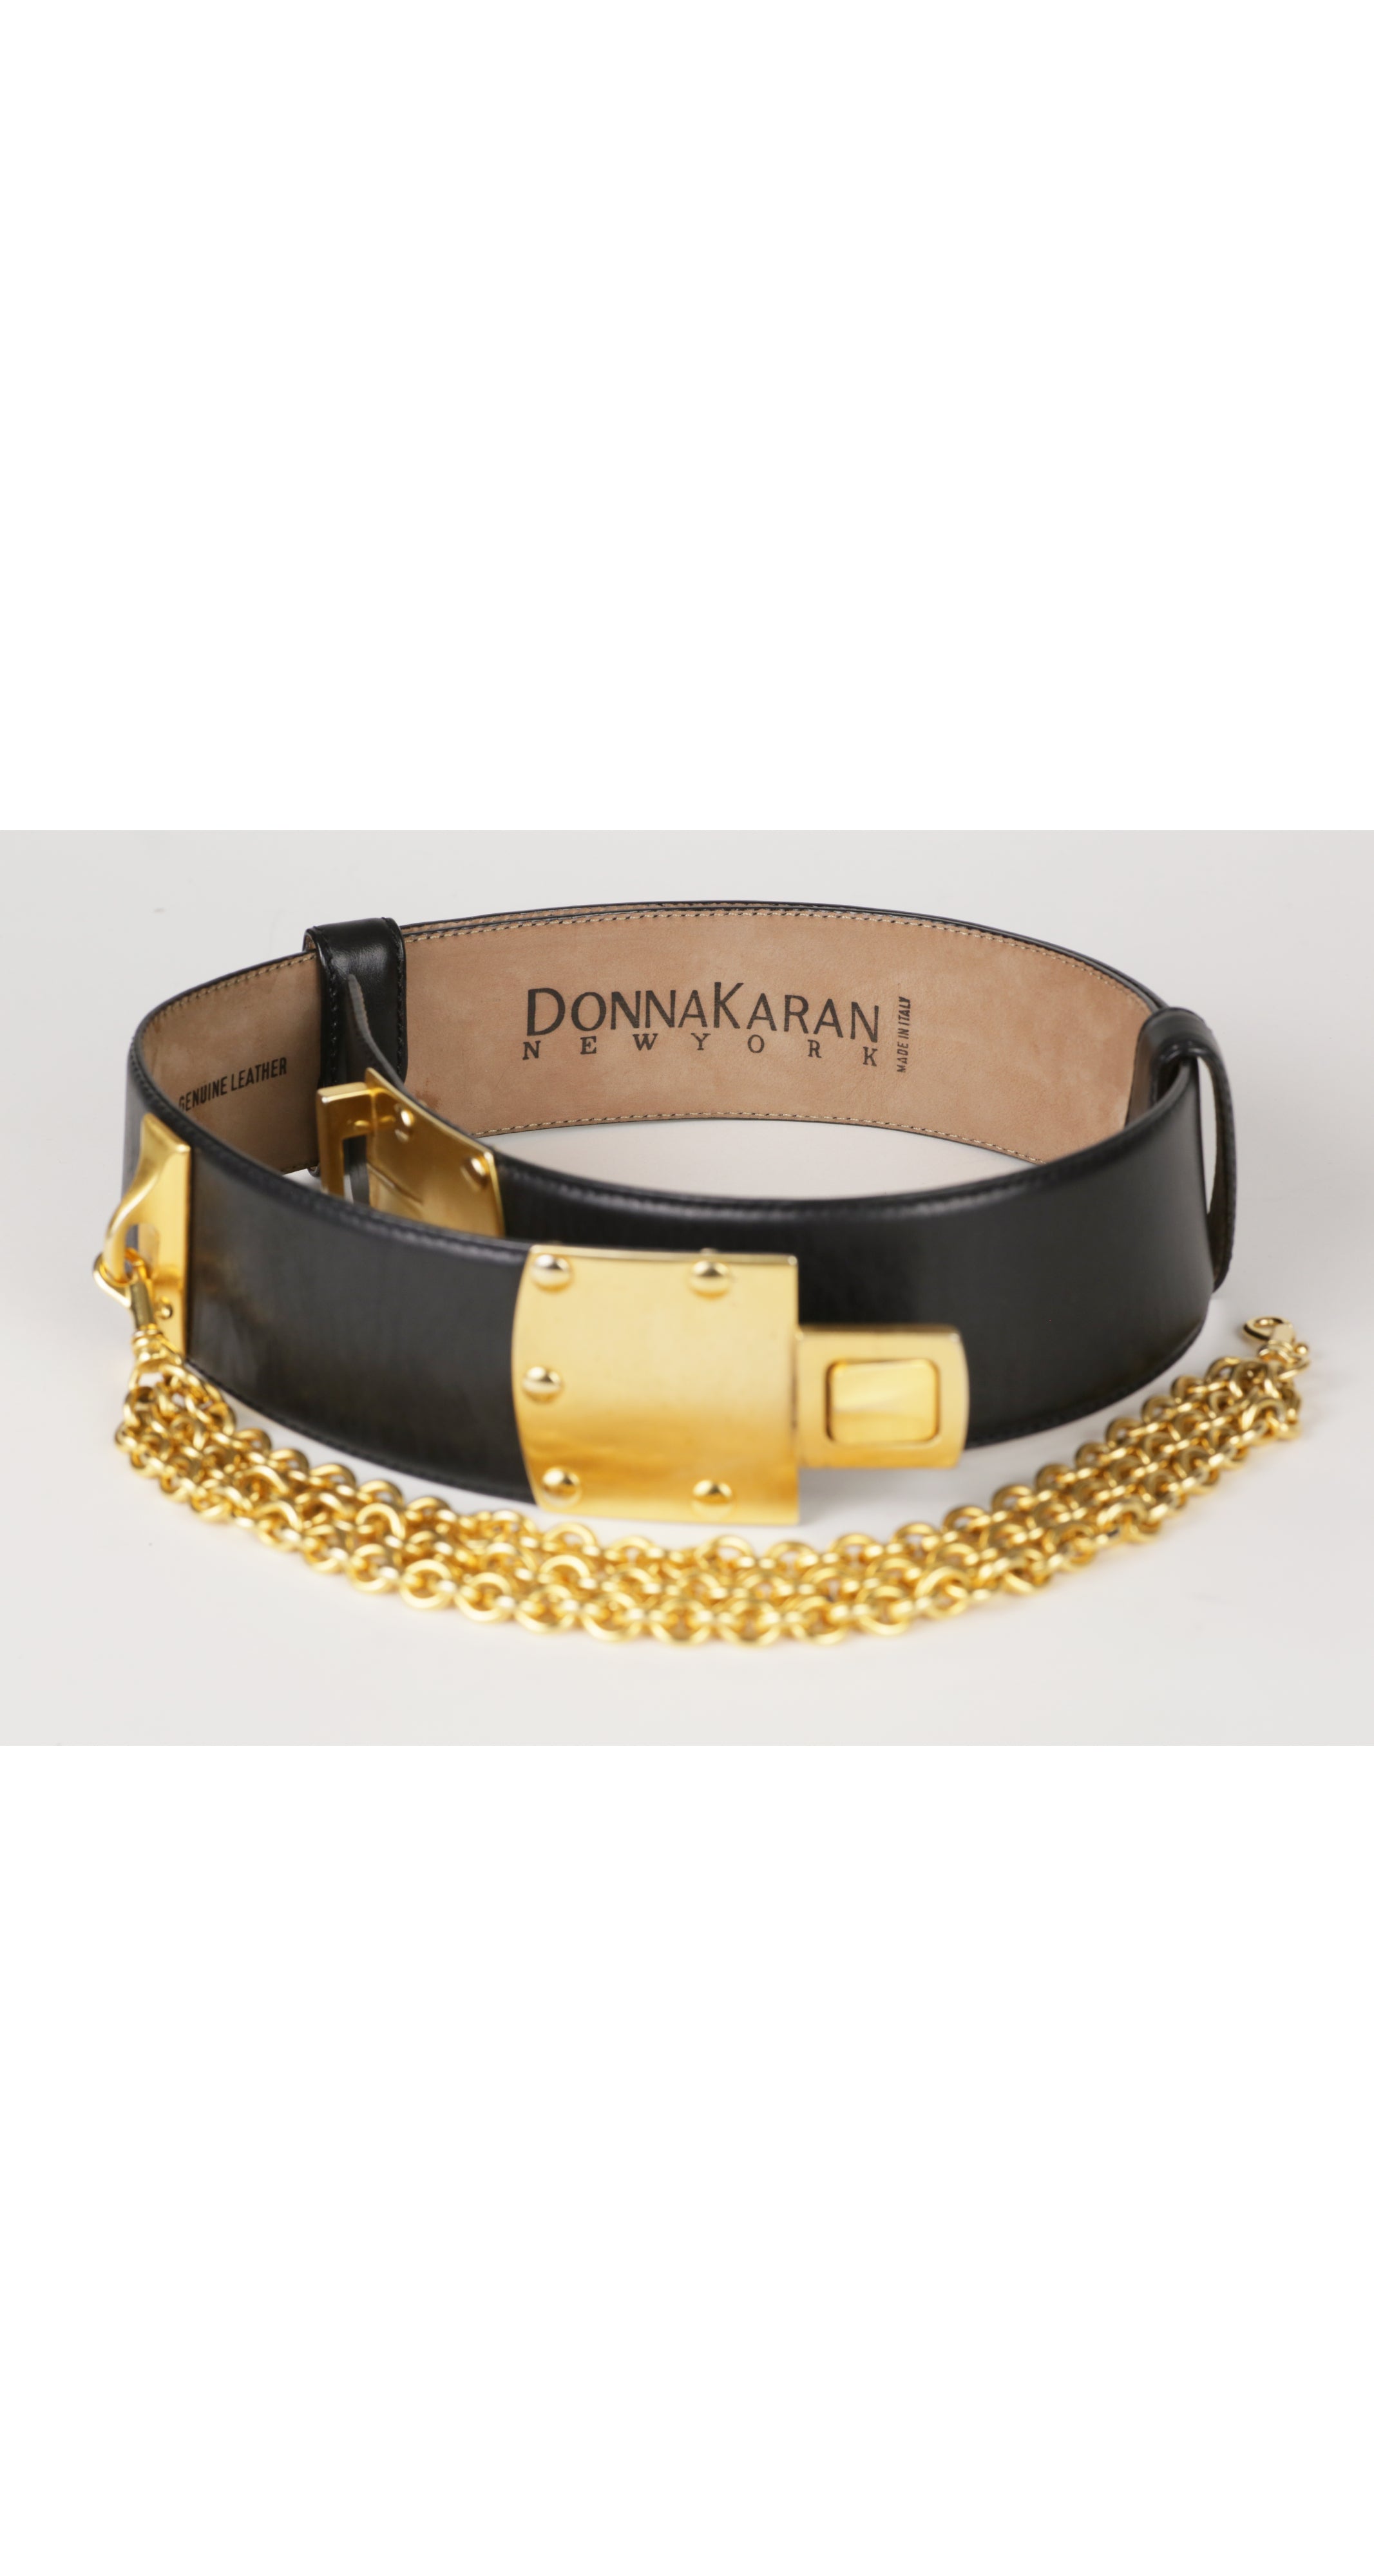 1985 Documented Gold Metal Chain Black Leather Belt